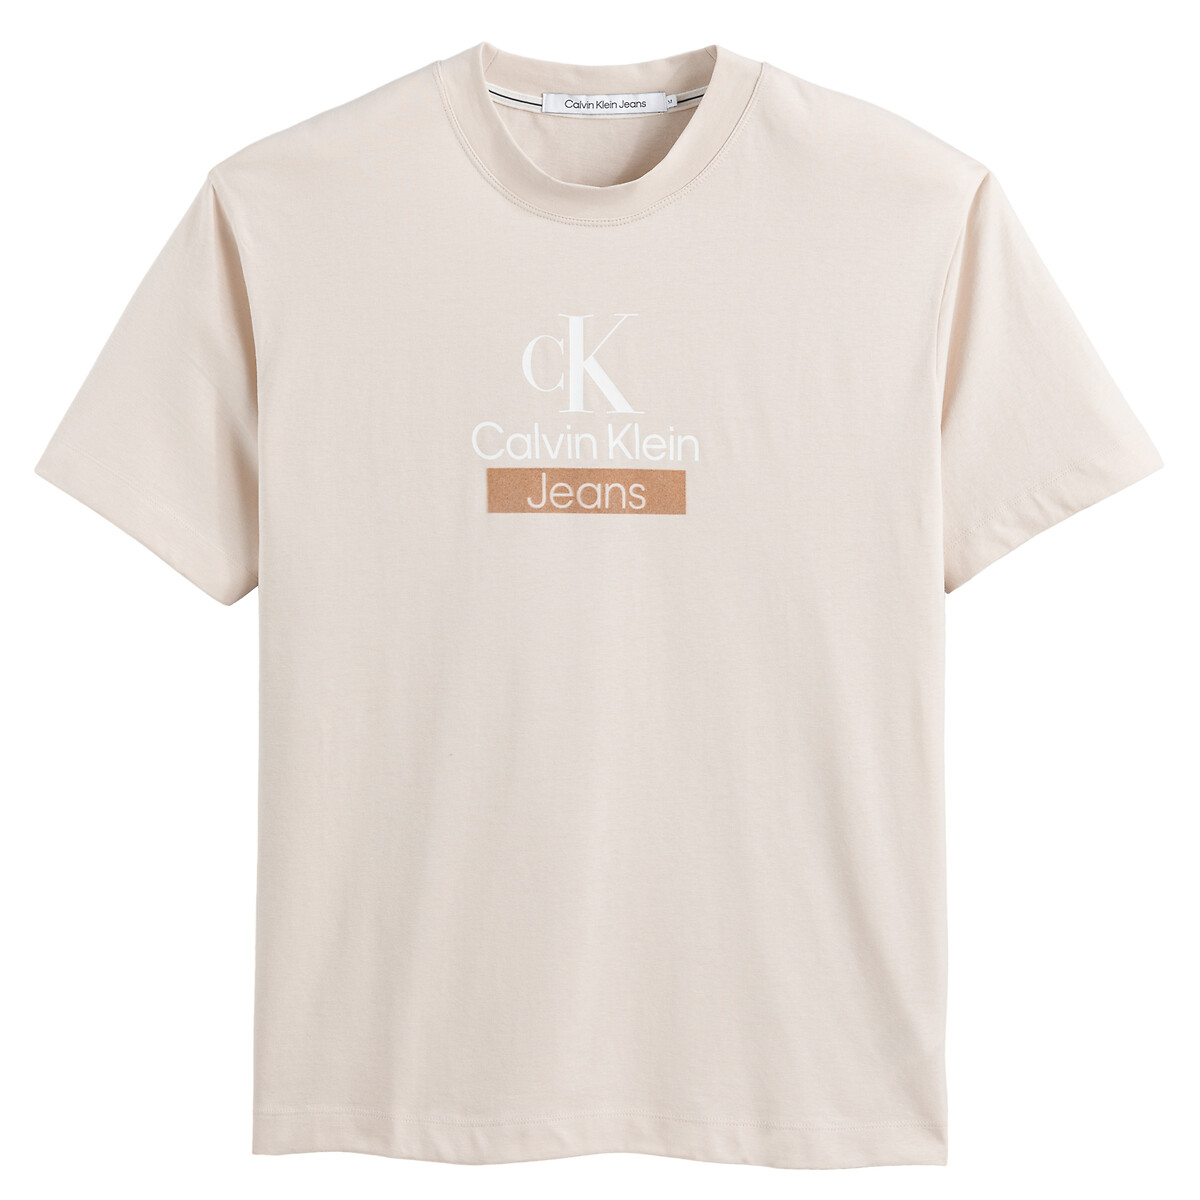 Image of Archival Logo Print T-Shirt in Cotton with Crew Neck and Short Sleeves